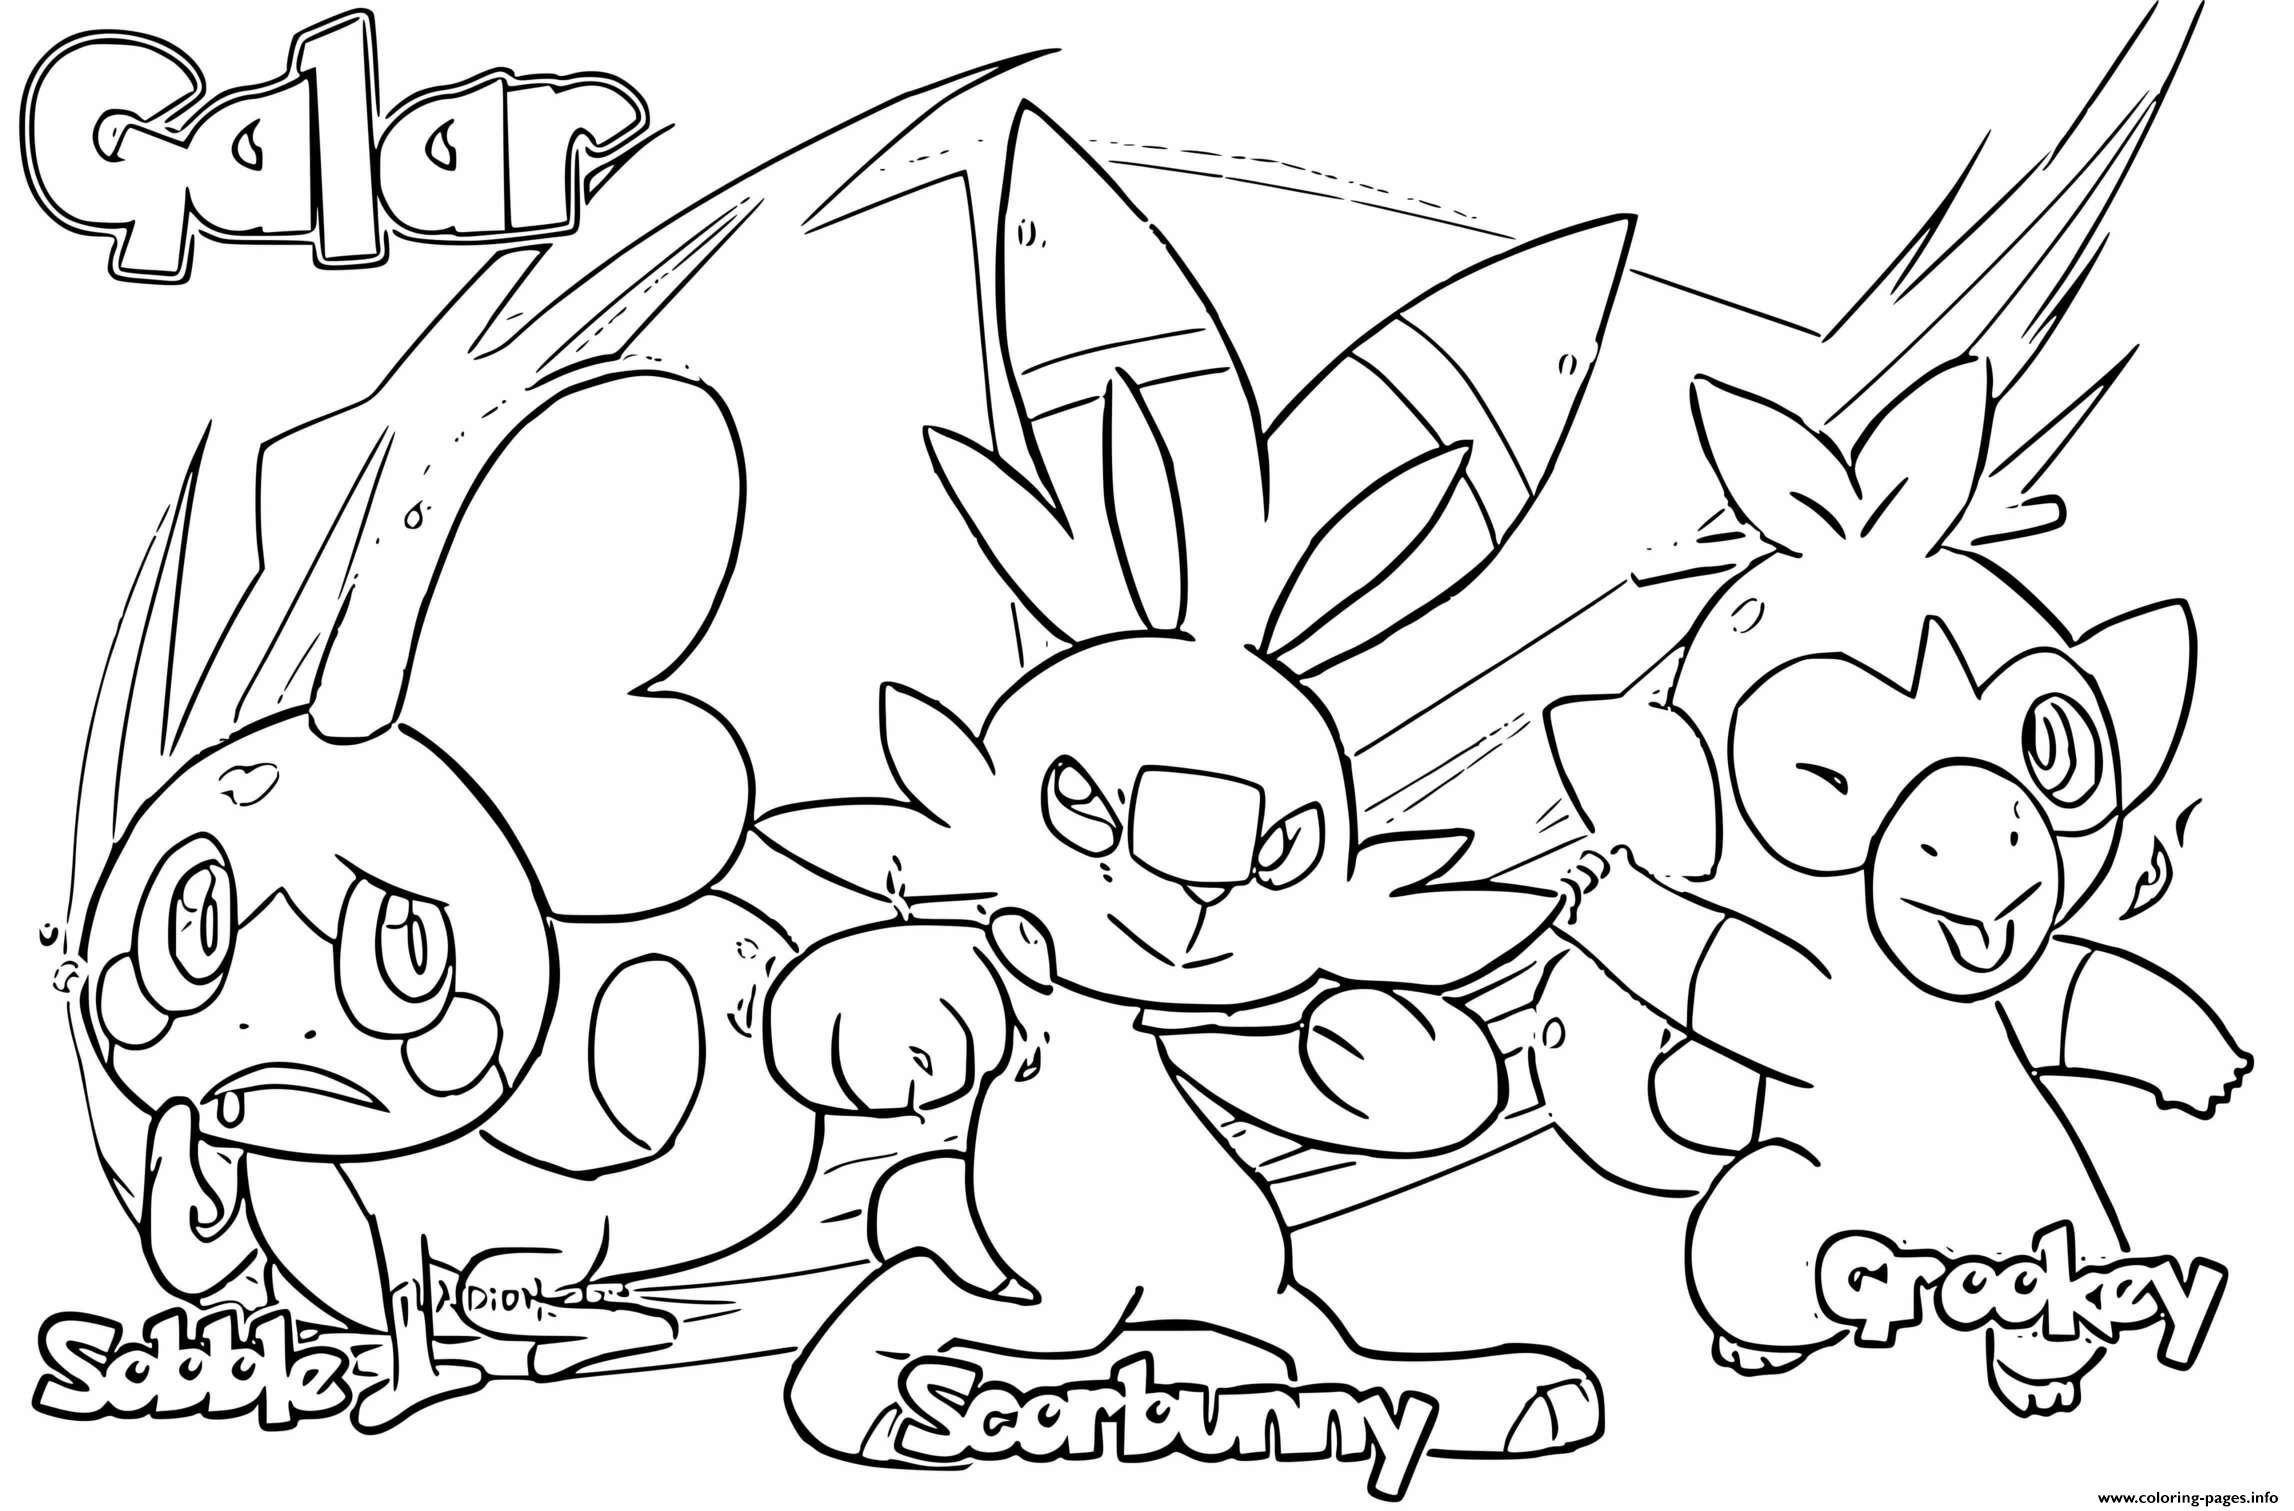 Scorbunny Coloring Pages.